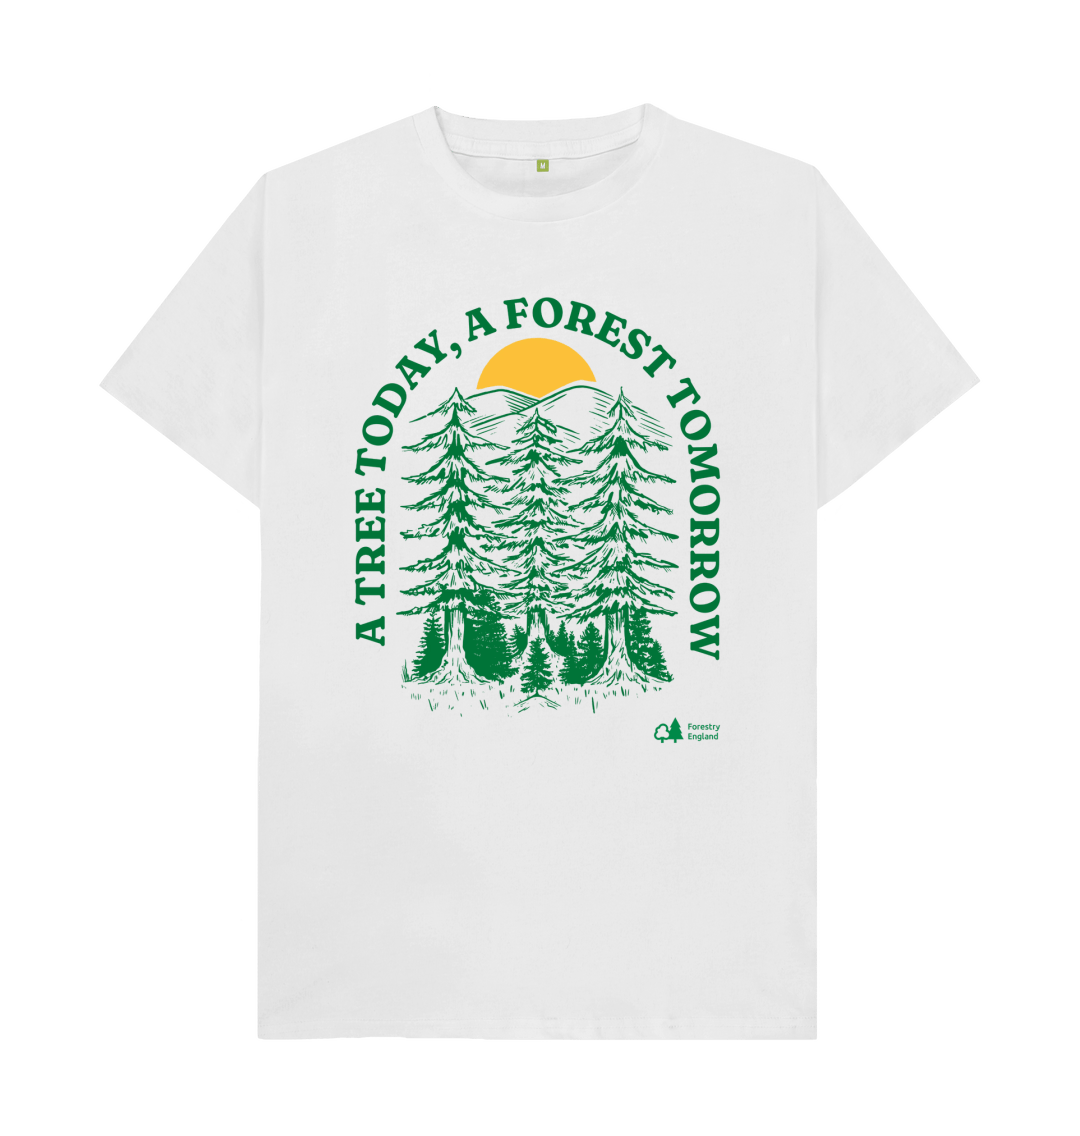 A Tree Today T-shirt